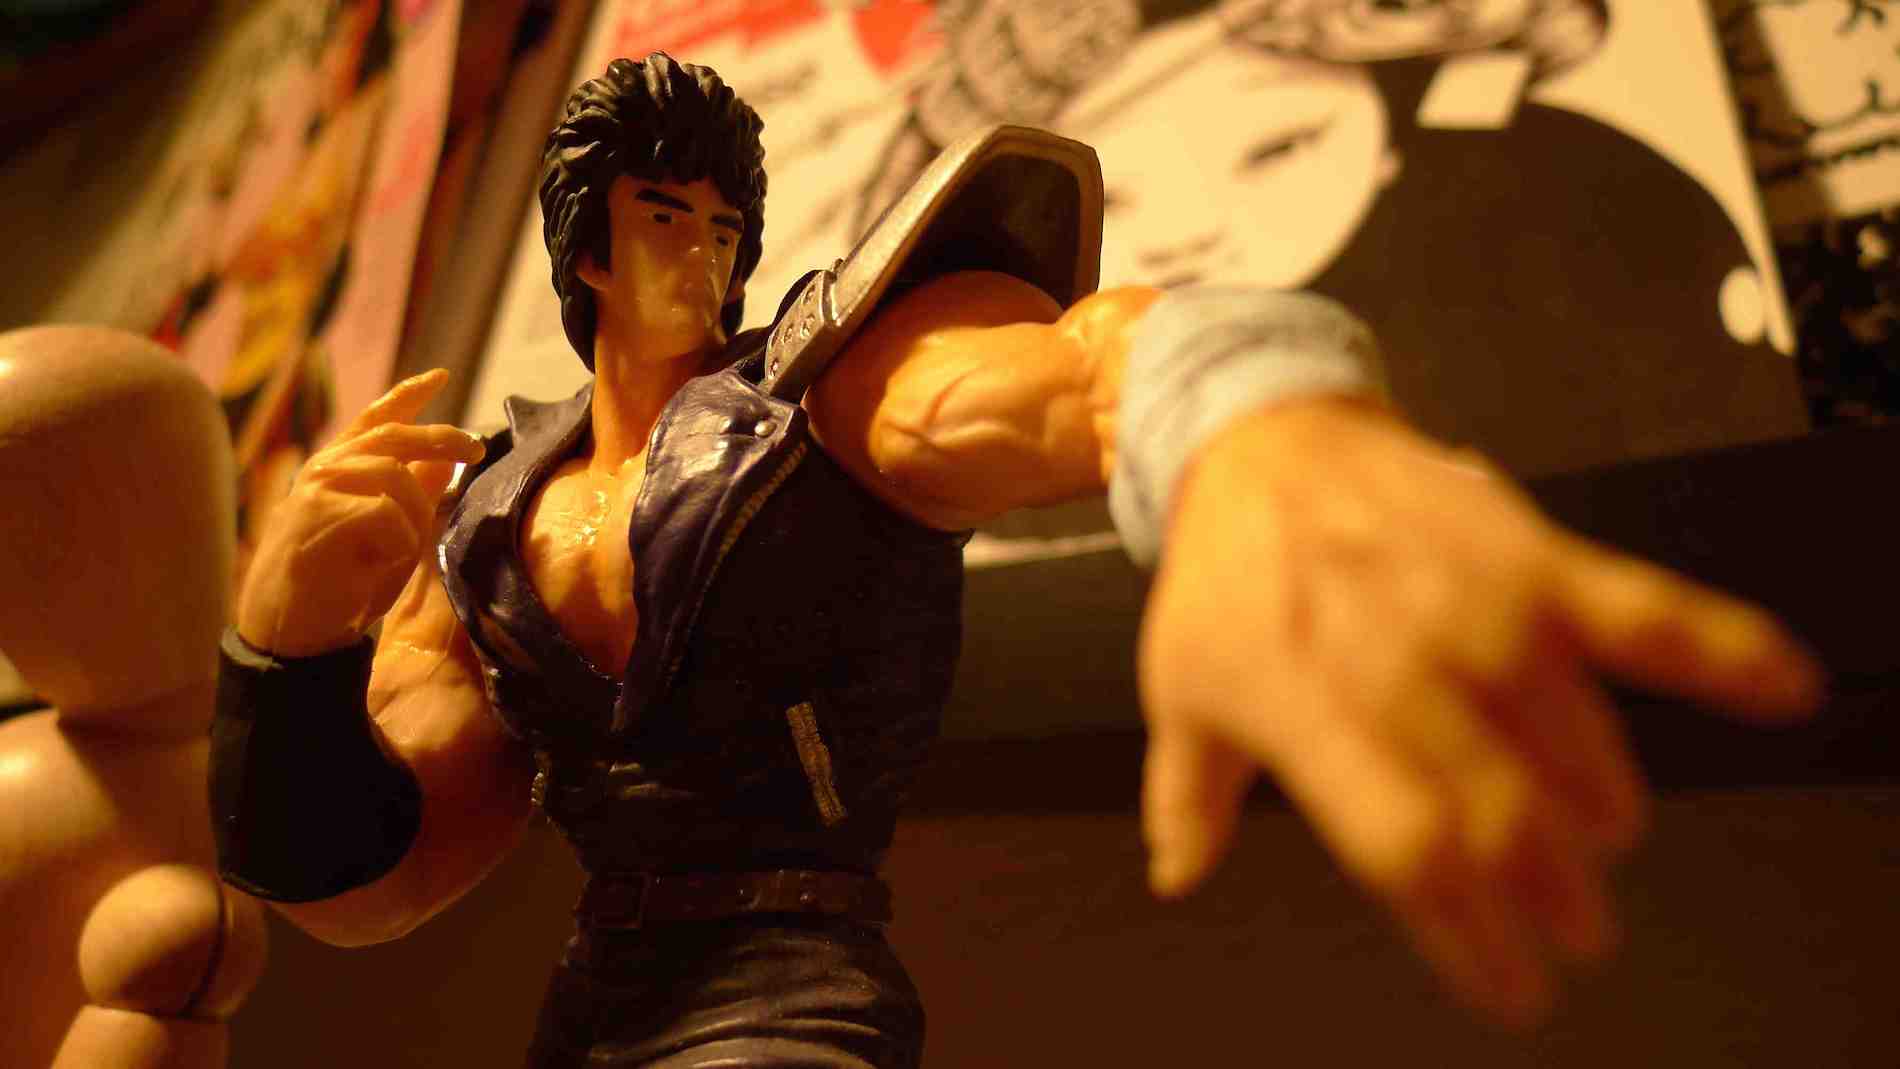 Kenshiro clock on shelf in my old home office.